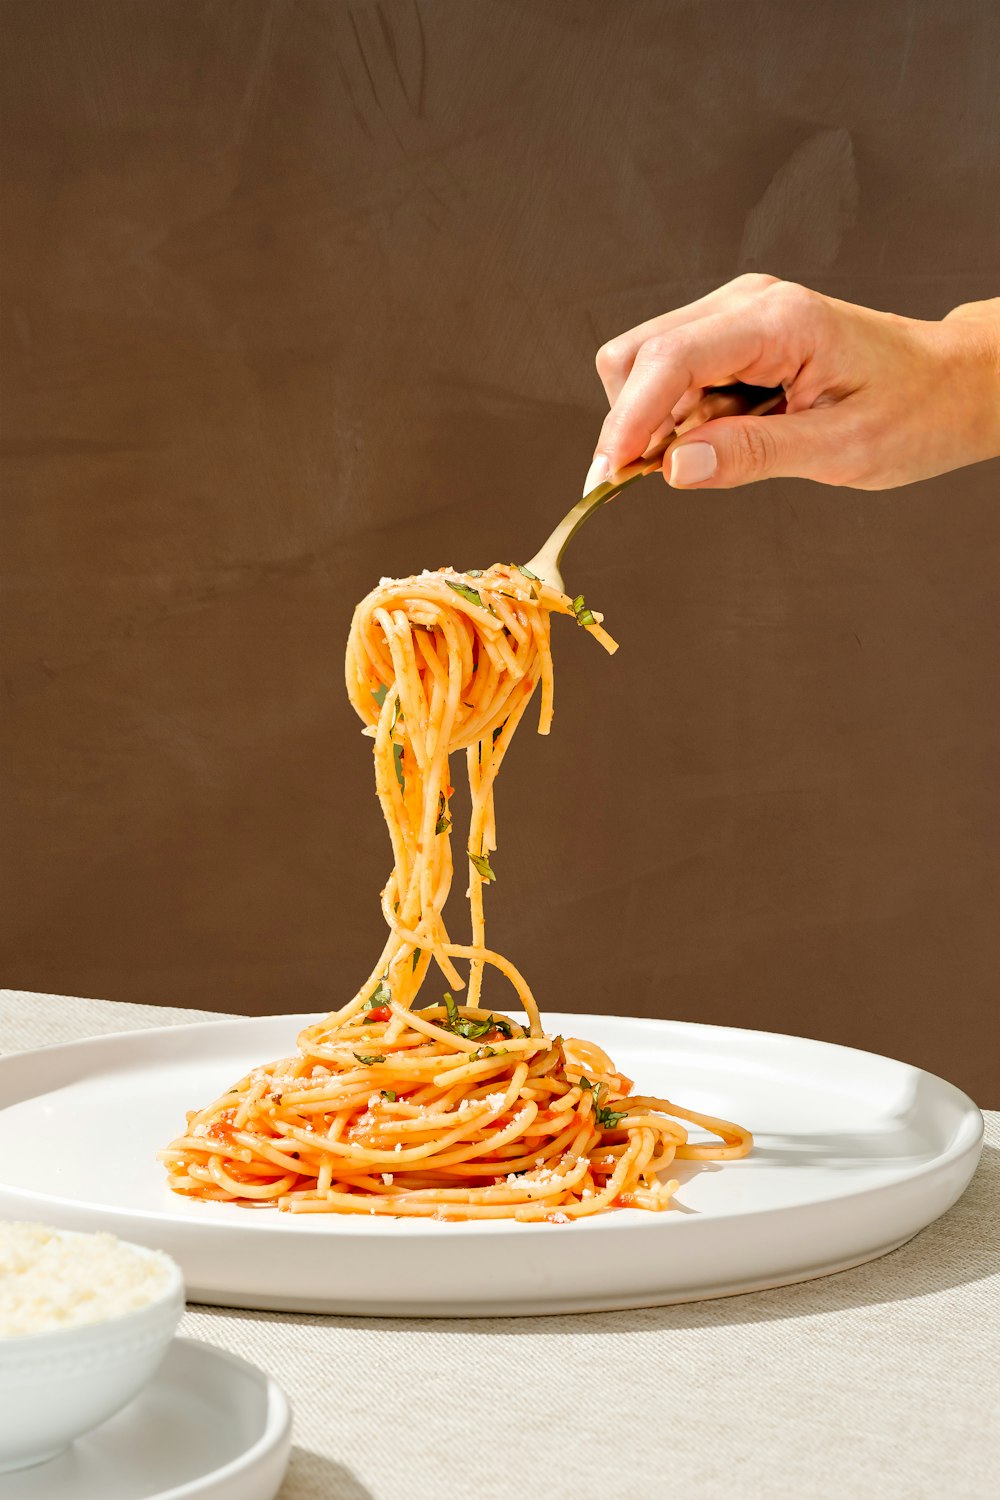 a plate of spaghetti being lifted with a fork